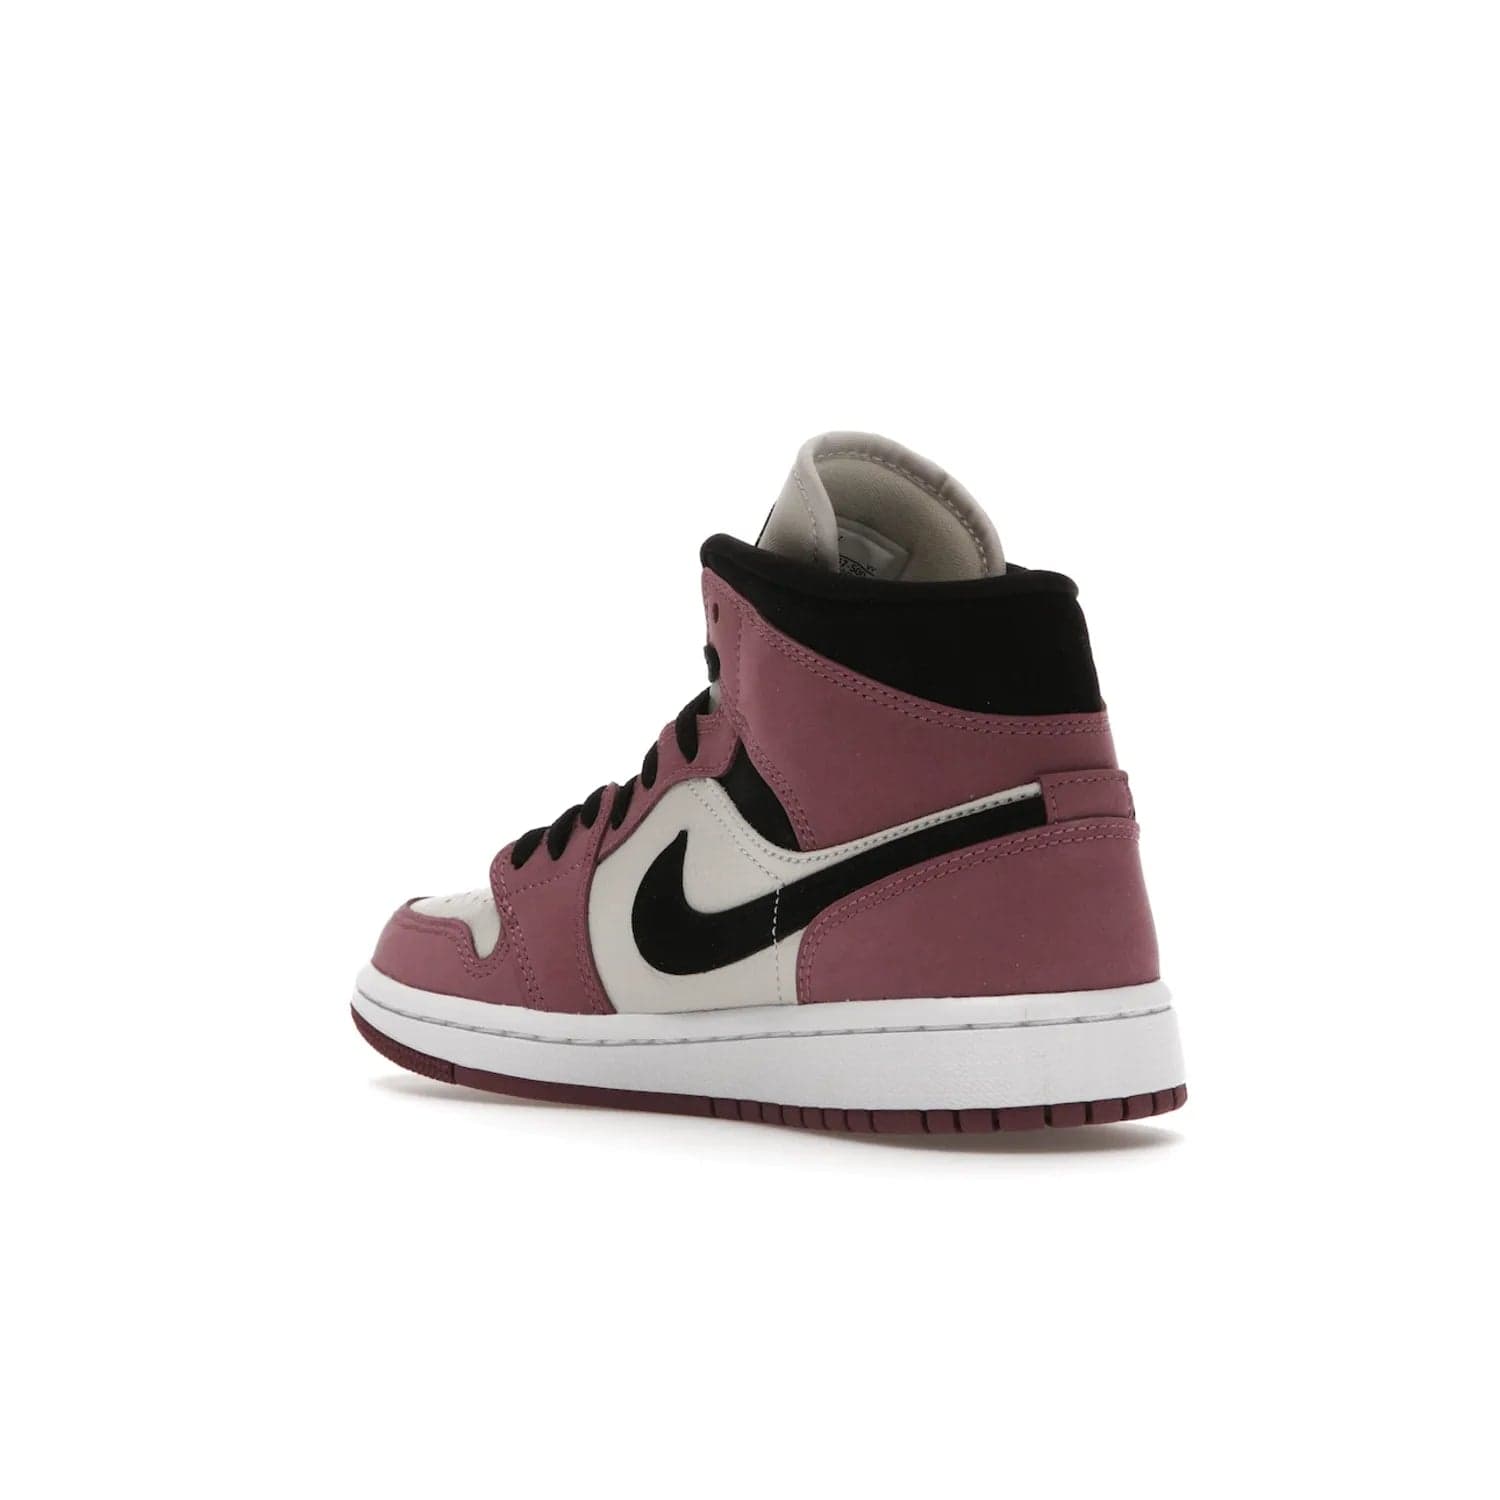 Jordan 1 Mid SE Light Mulberry (Women's) - Image 24 - Only at www.BallersClubKickz.com - Classic style meets performance with the Air Jordan 1 Mid Light Mulberry (Women's). Sleek leather overlays and light bone detailing bring out the best of this classic sneaker, perfect for the active woman on-the-go. Available March 2022.